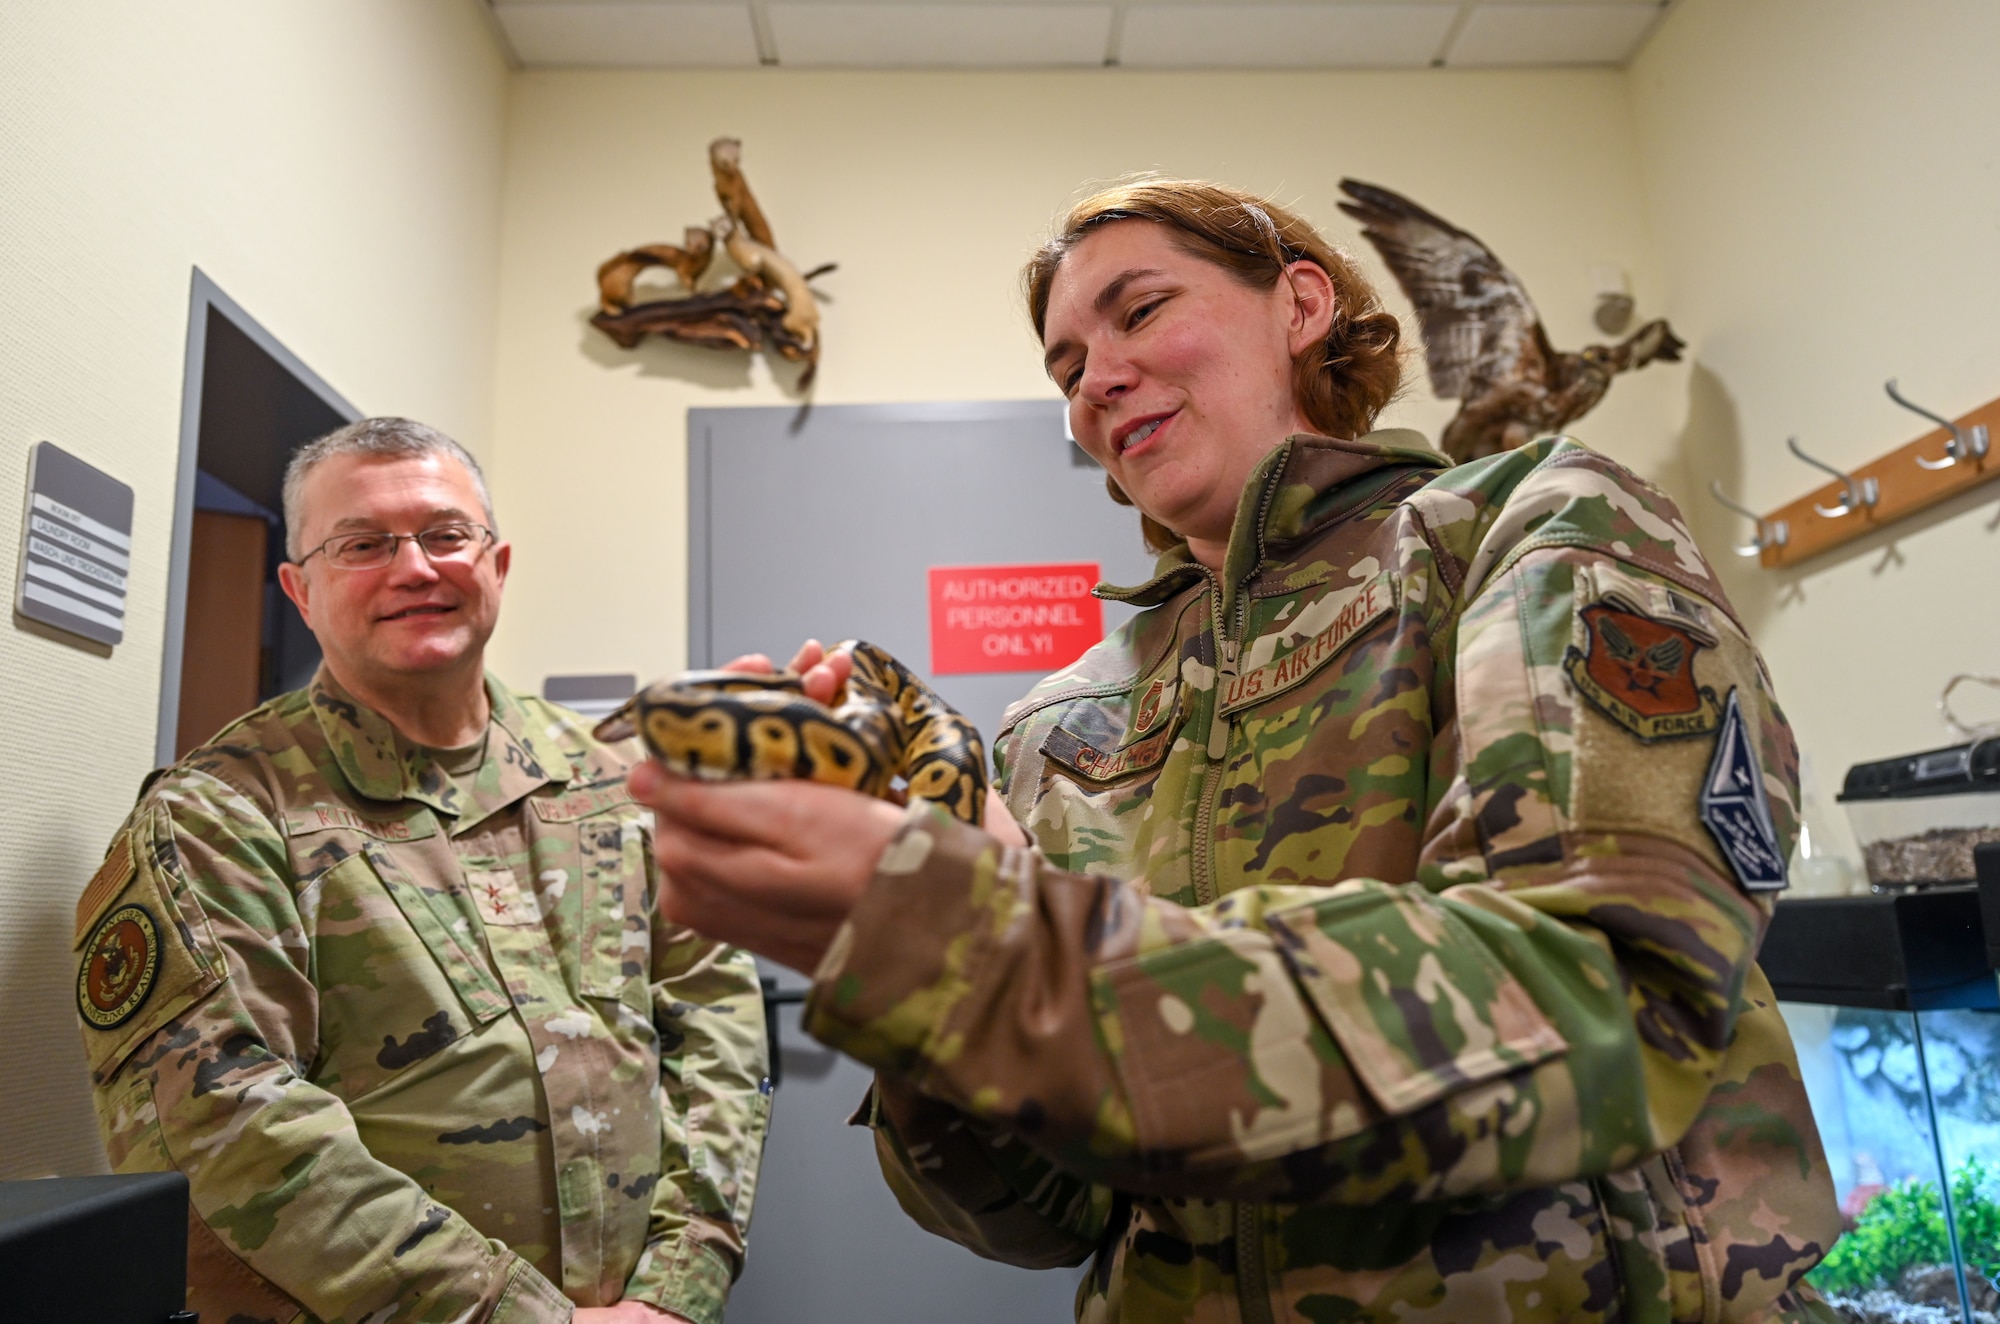 Chaplain (Maj. Gen.) Randall Kitchens, U.S. Air Force chief of chaplains, and Chief Master Sgt. Sadie Chambers, Religious Affairs senior enlisted advisor, interact with snakes while visiting the 52nd Civil Engineer Squadron Pest Management Office at Spangdahlem Air Base, Germany, Nov. 16, 2022. Chambers is responsible for the deliberate development of over 1,000 active-duty Air Force, Guard and Reserve Religious Affairs Airmen. (U.S. Air Force photo by Senior Airman Jessica Sanchez-Chen)